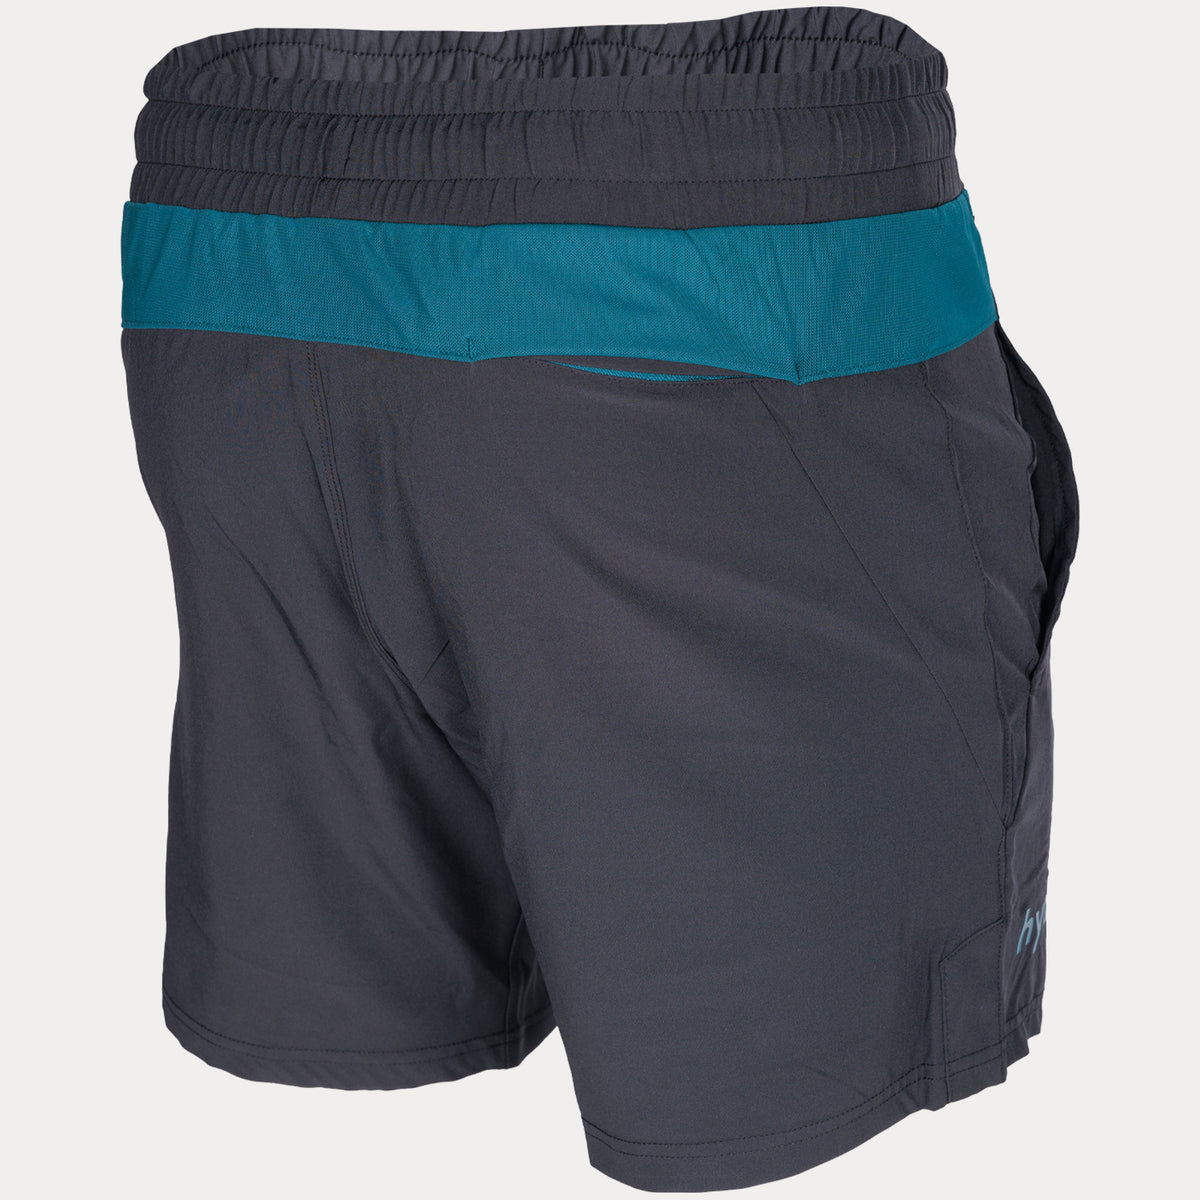 back view compression short in black with hydrow blue stripe and tie string